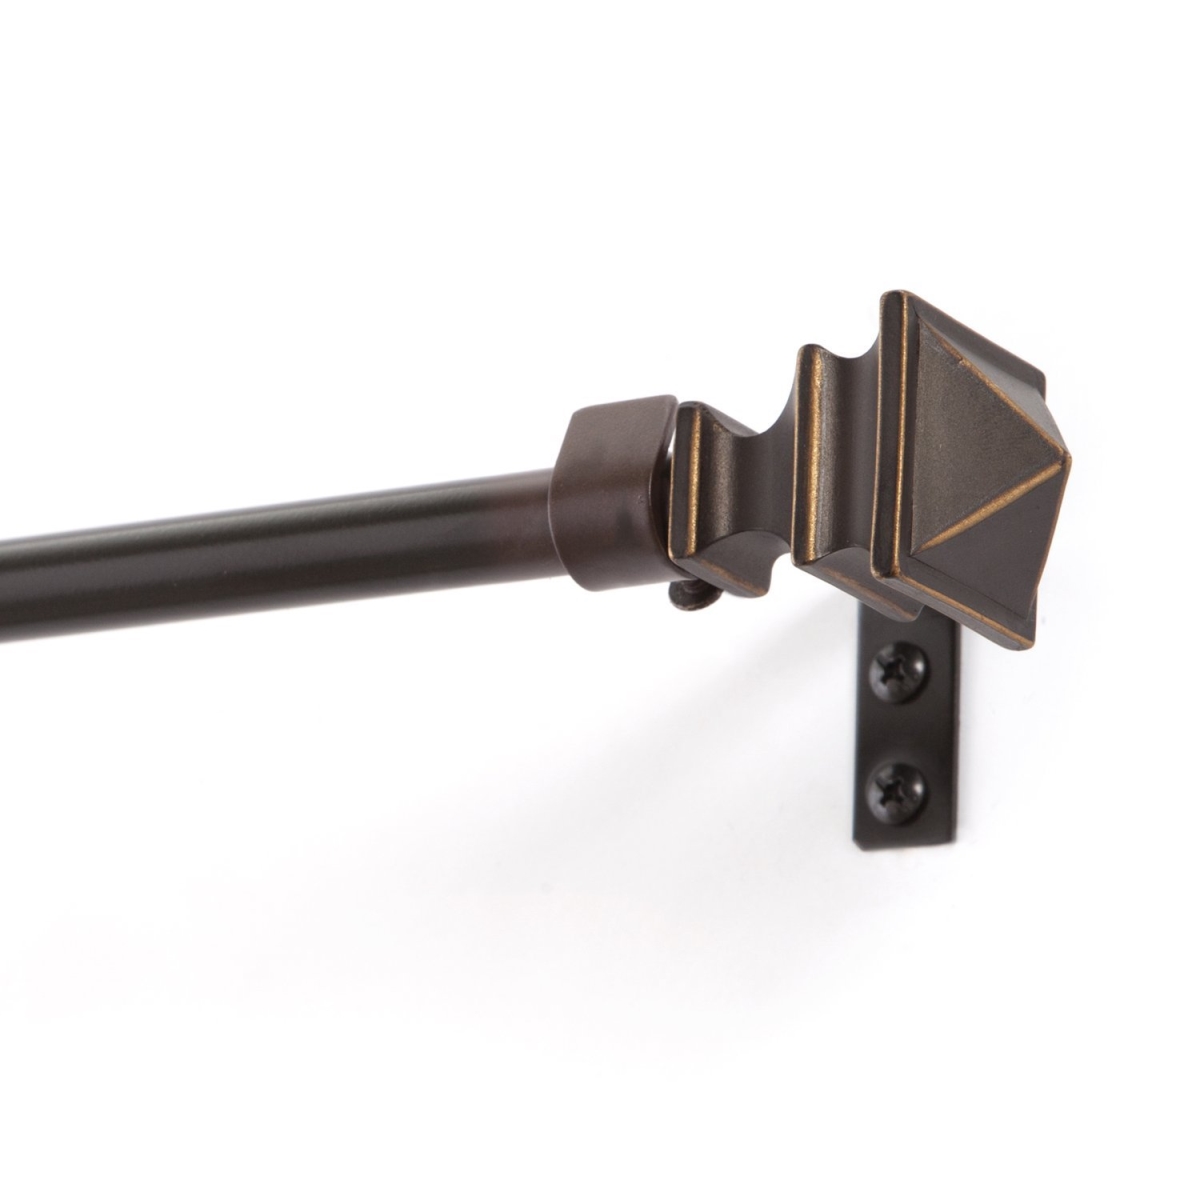 32-lwf1004-2orb 48-88 In. Painted Oil Rubbed Bronze Finish Single Rod Window Hardware With Square Resin Finial